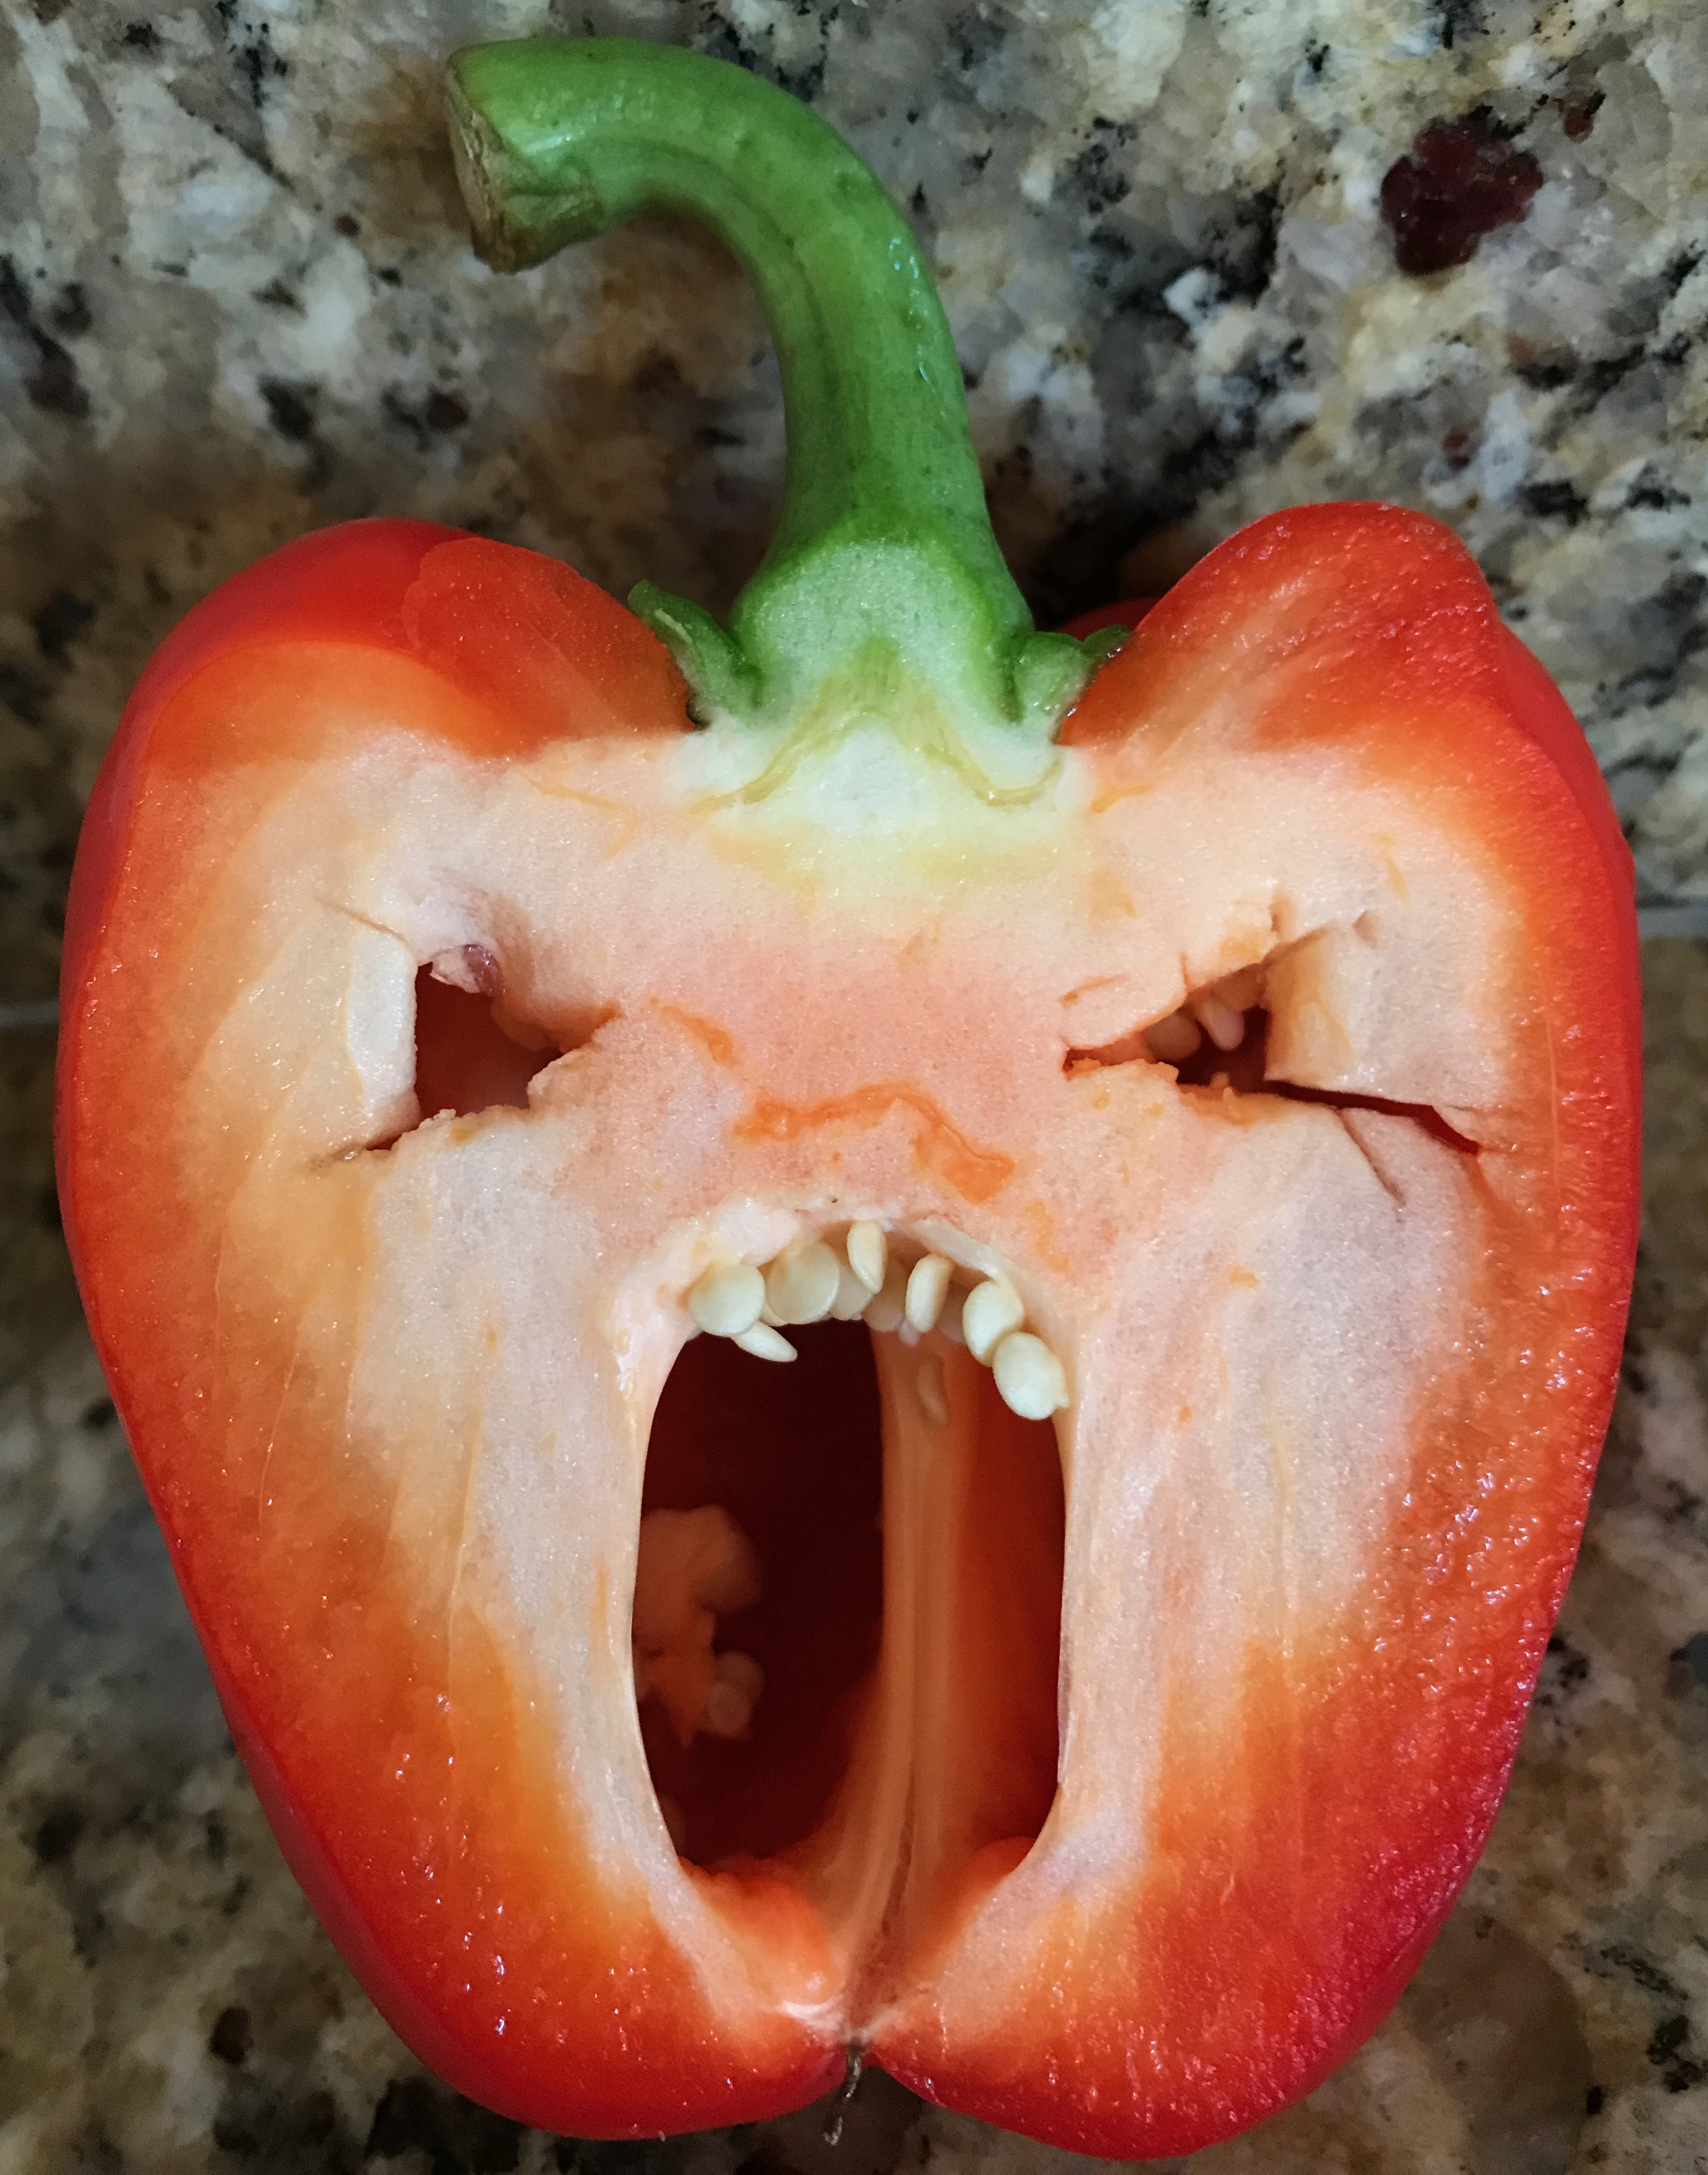 Pepper with an angry face carved into it